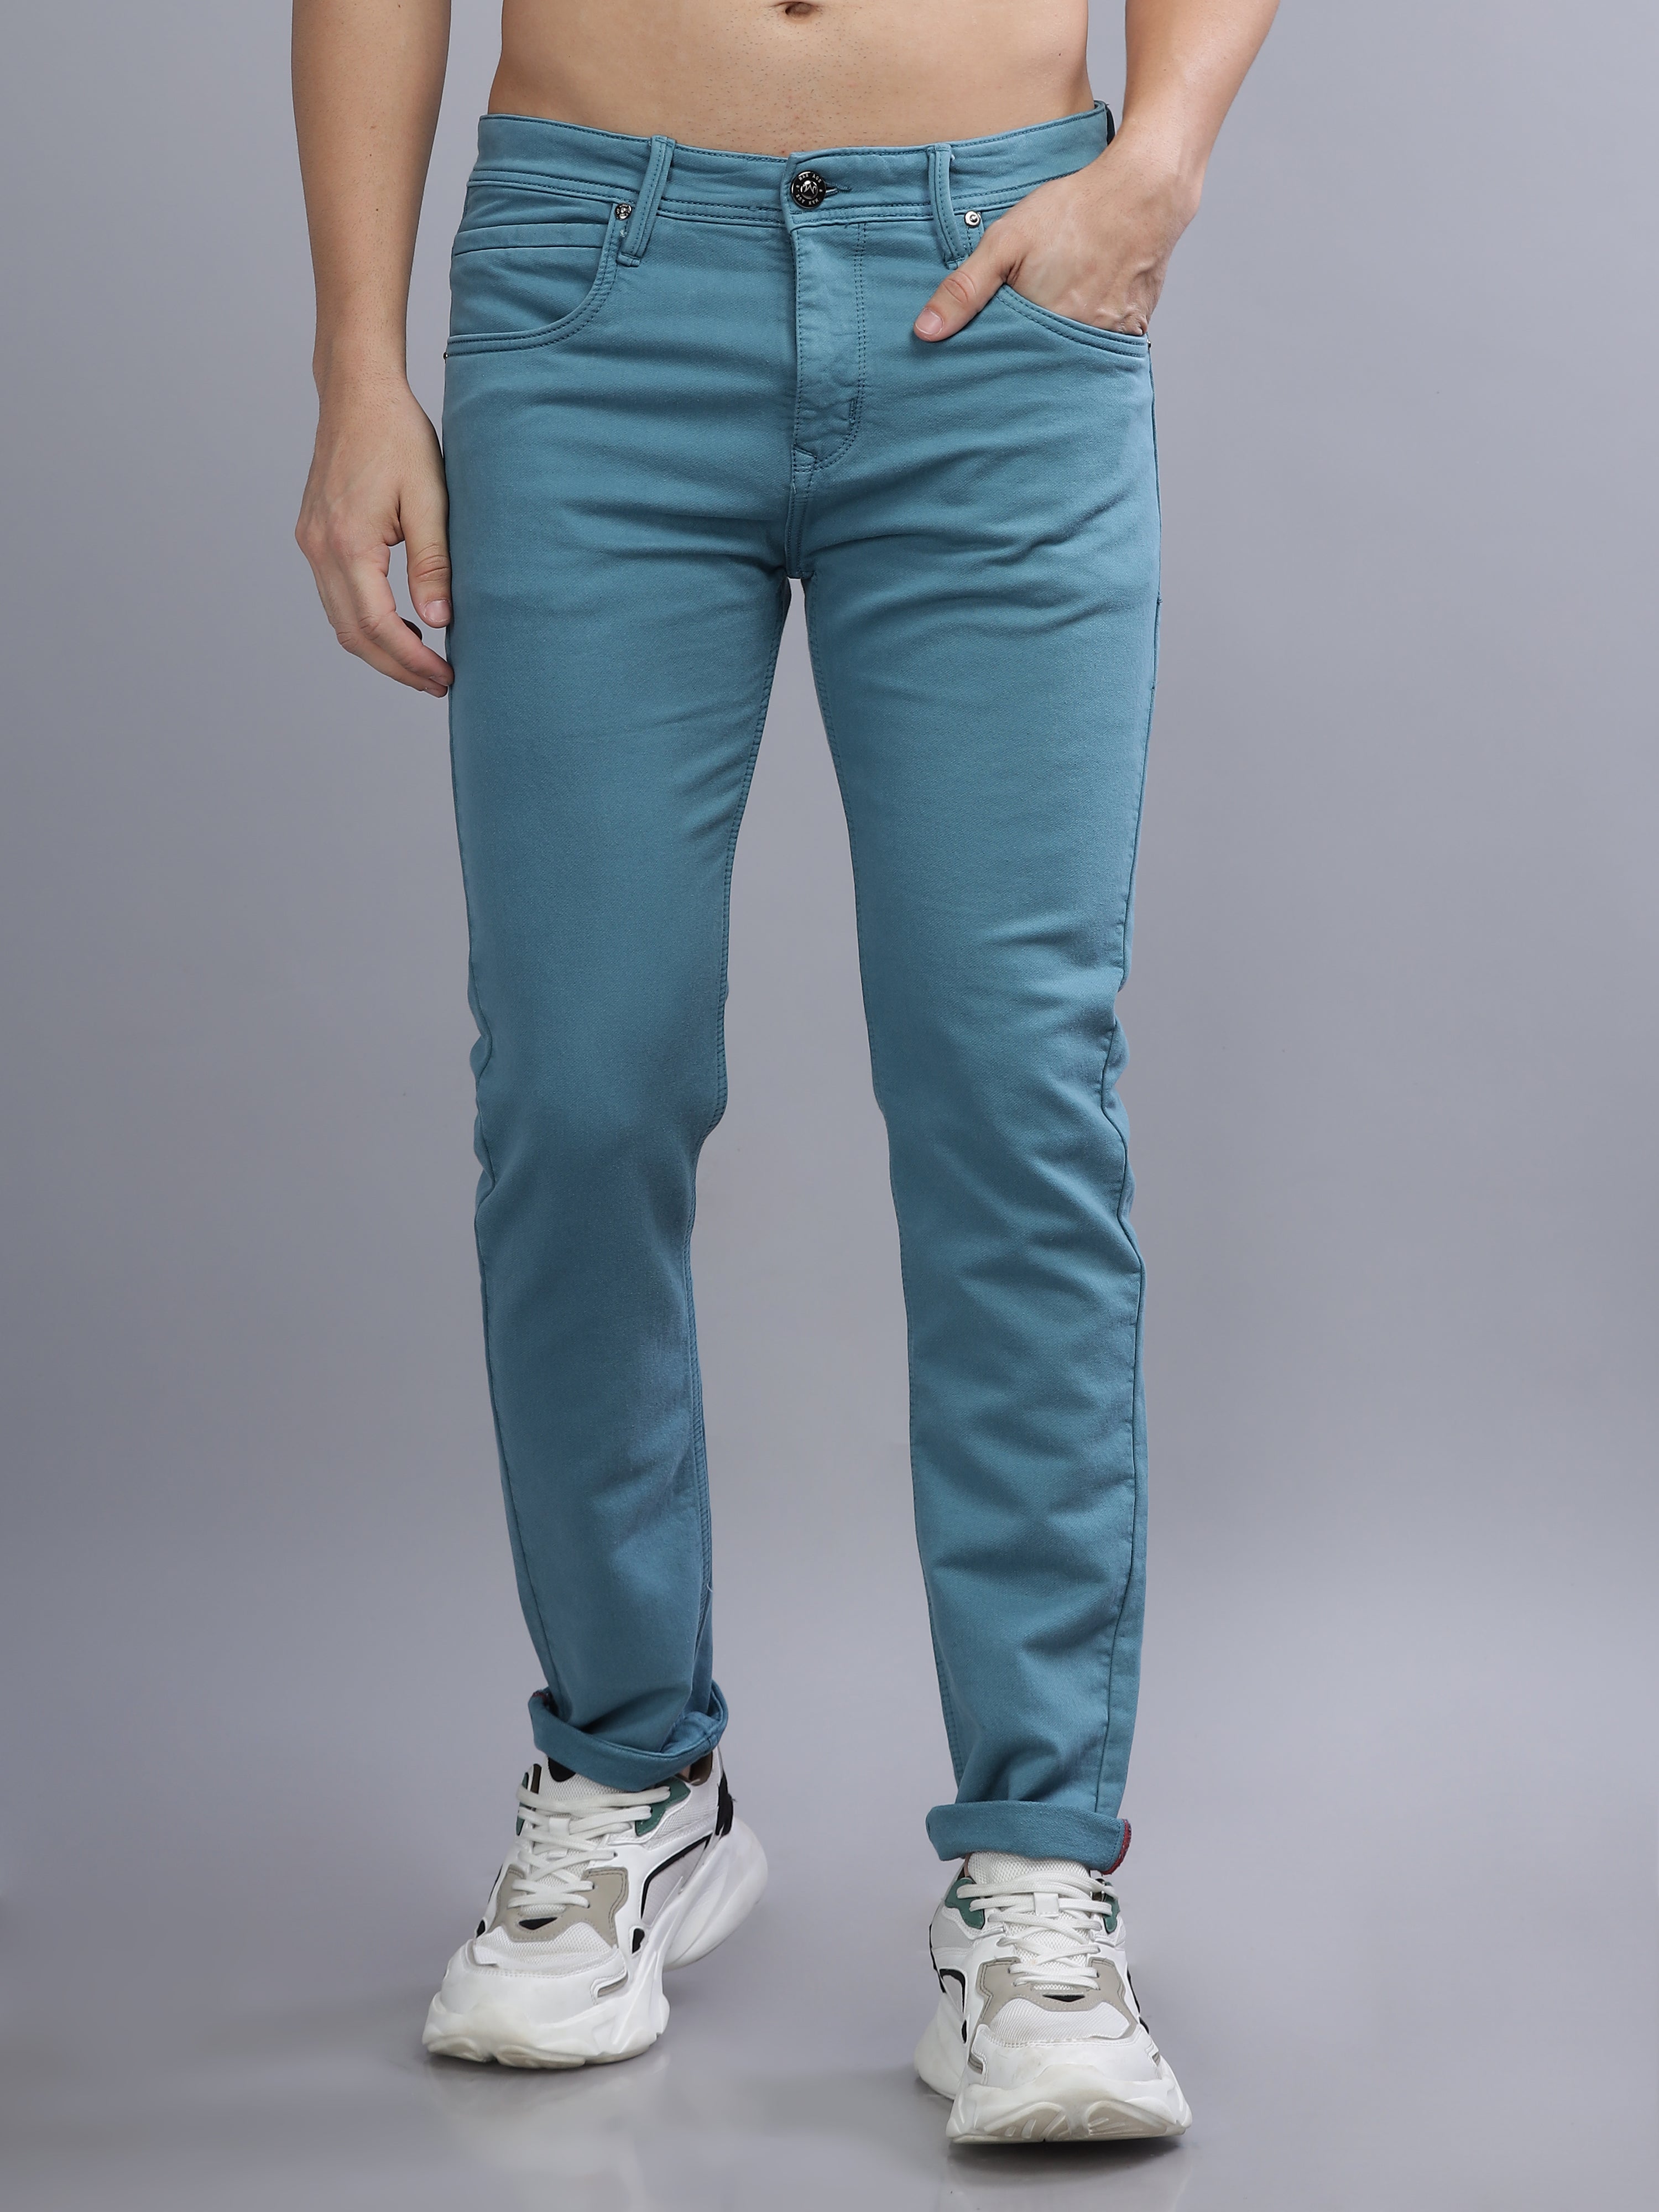 Mens Cotton Lycra Jeans at Rs 400/piece in Bengaluru | ID: 19387037612